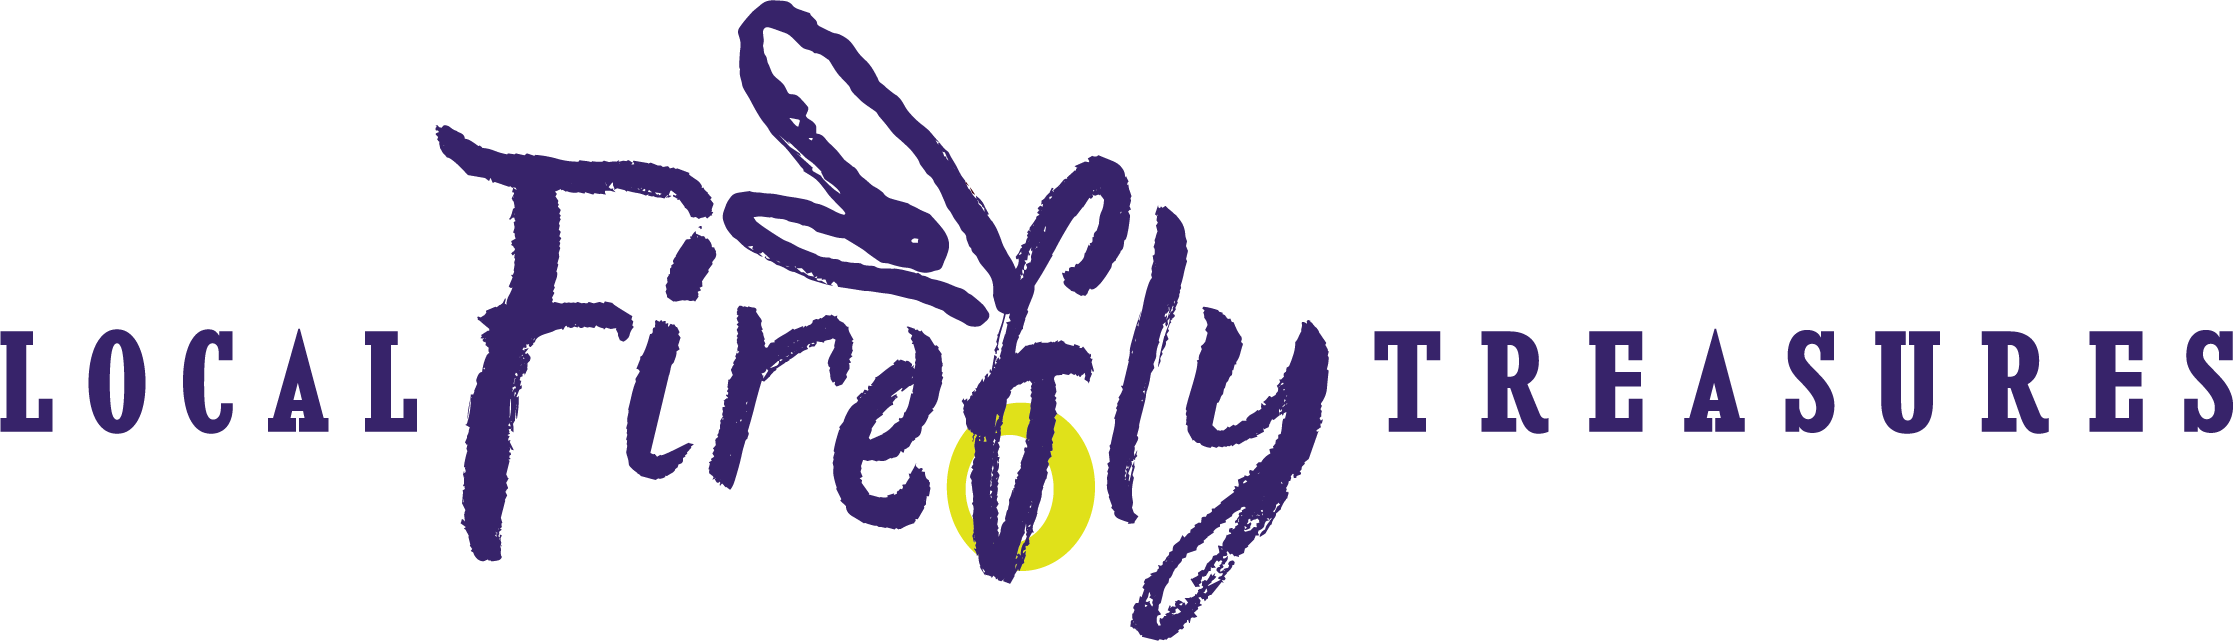 Firefly Local Treasures Logo - Firefly Local Treasures (2233x641), Png Download